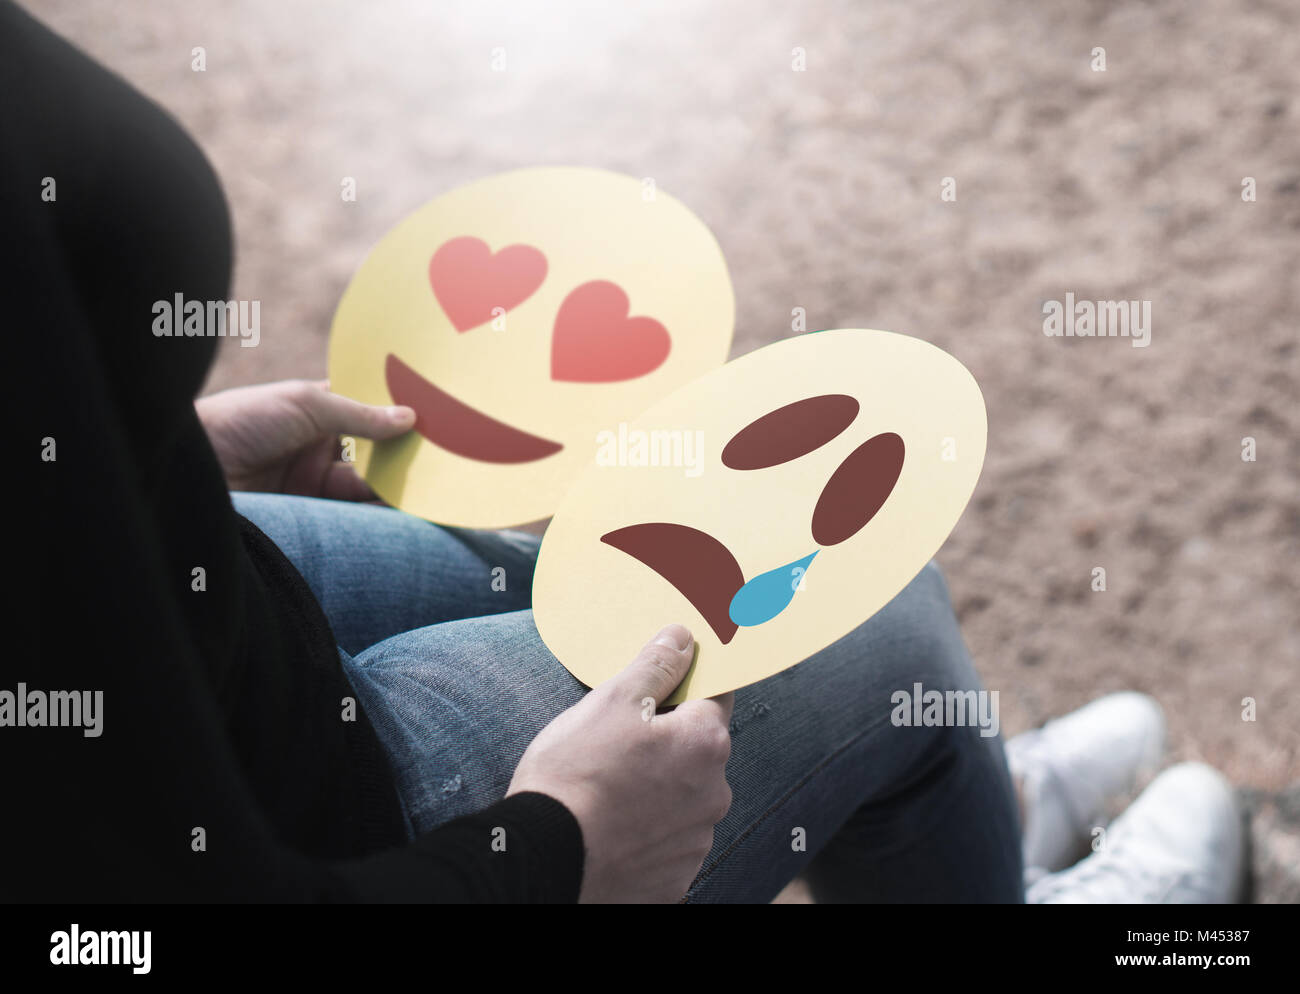 Woman holding 2 cardboard emoticons in hand. Love heart and crying smiley faces. Heartbroken or confused girl having mixed feelings about emotions. Stock Photo